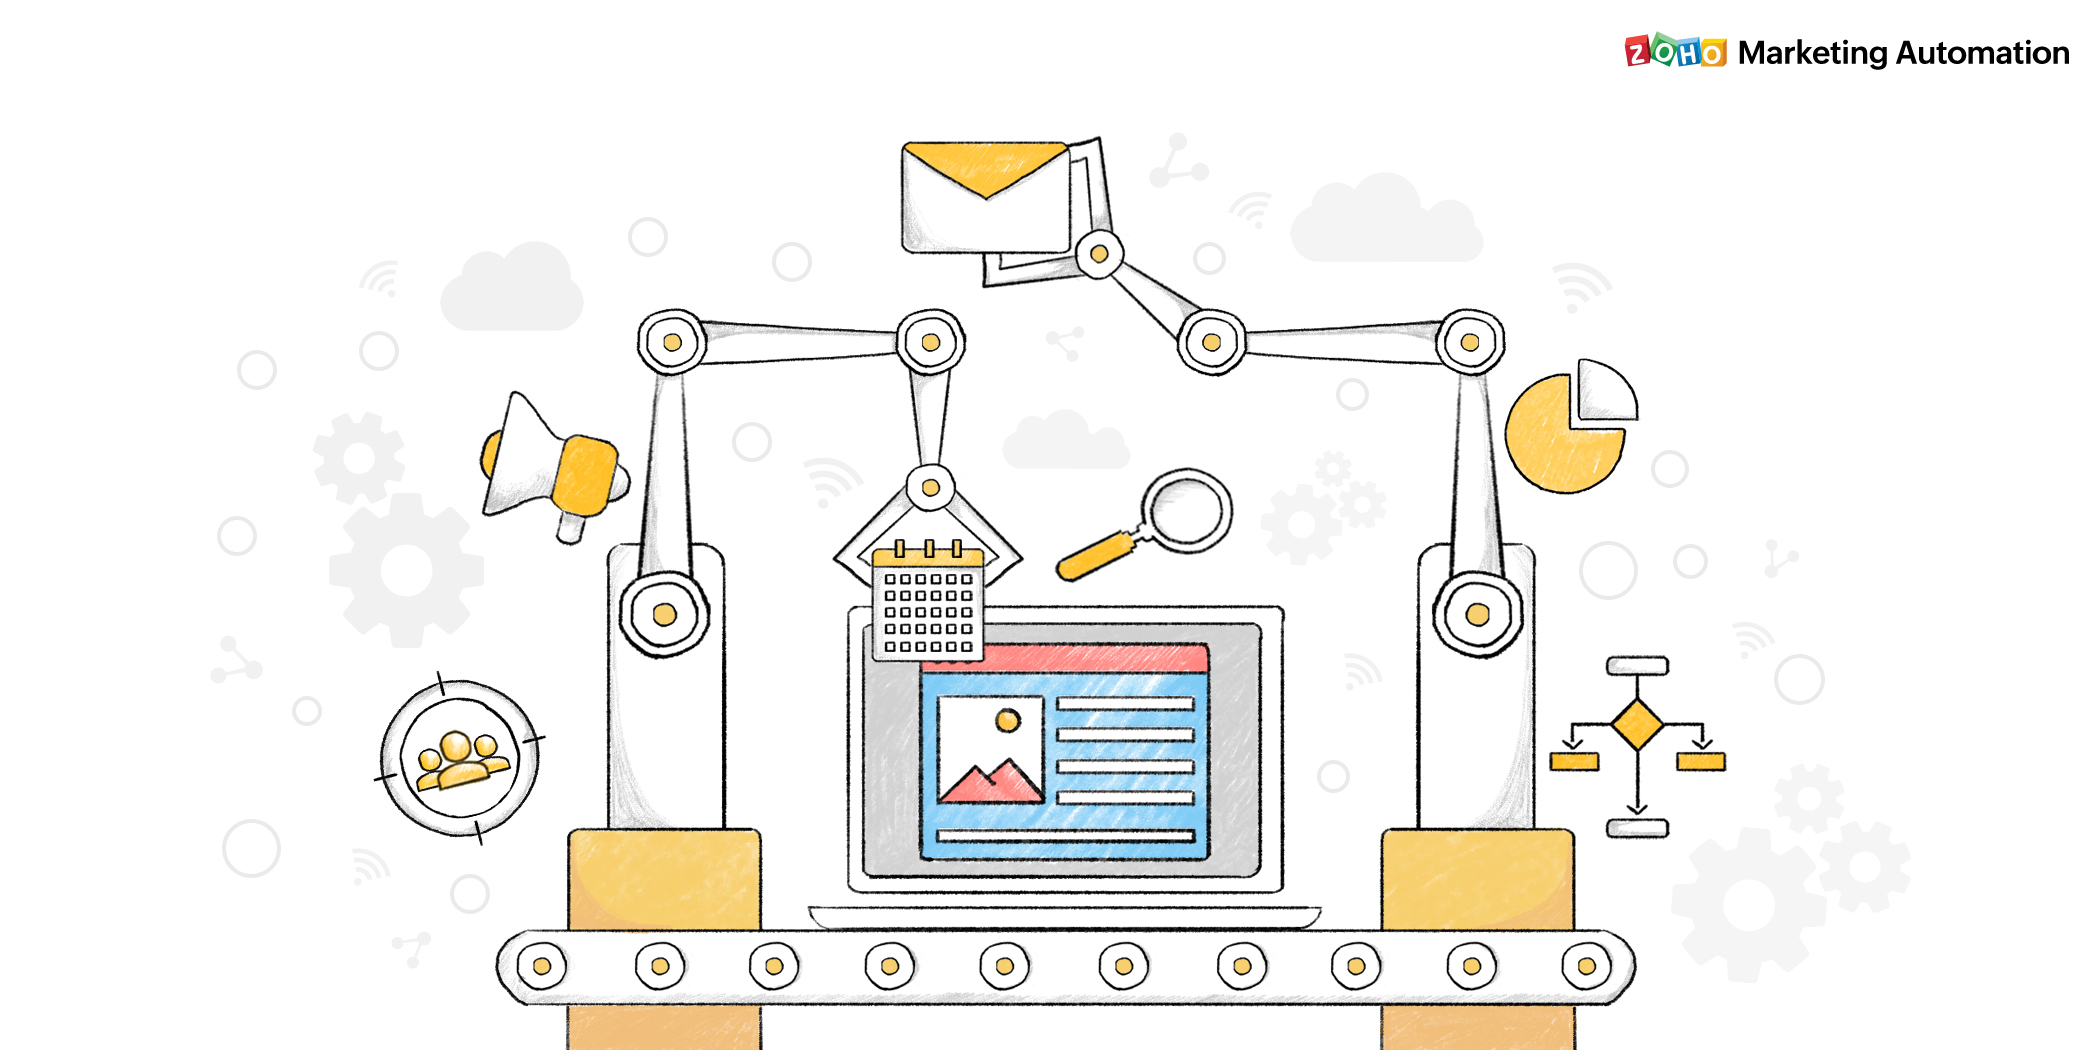 When should you use marketing automation?